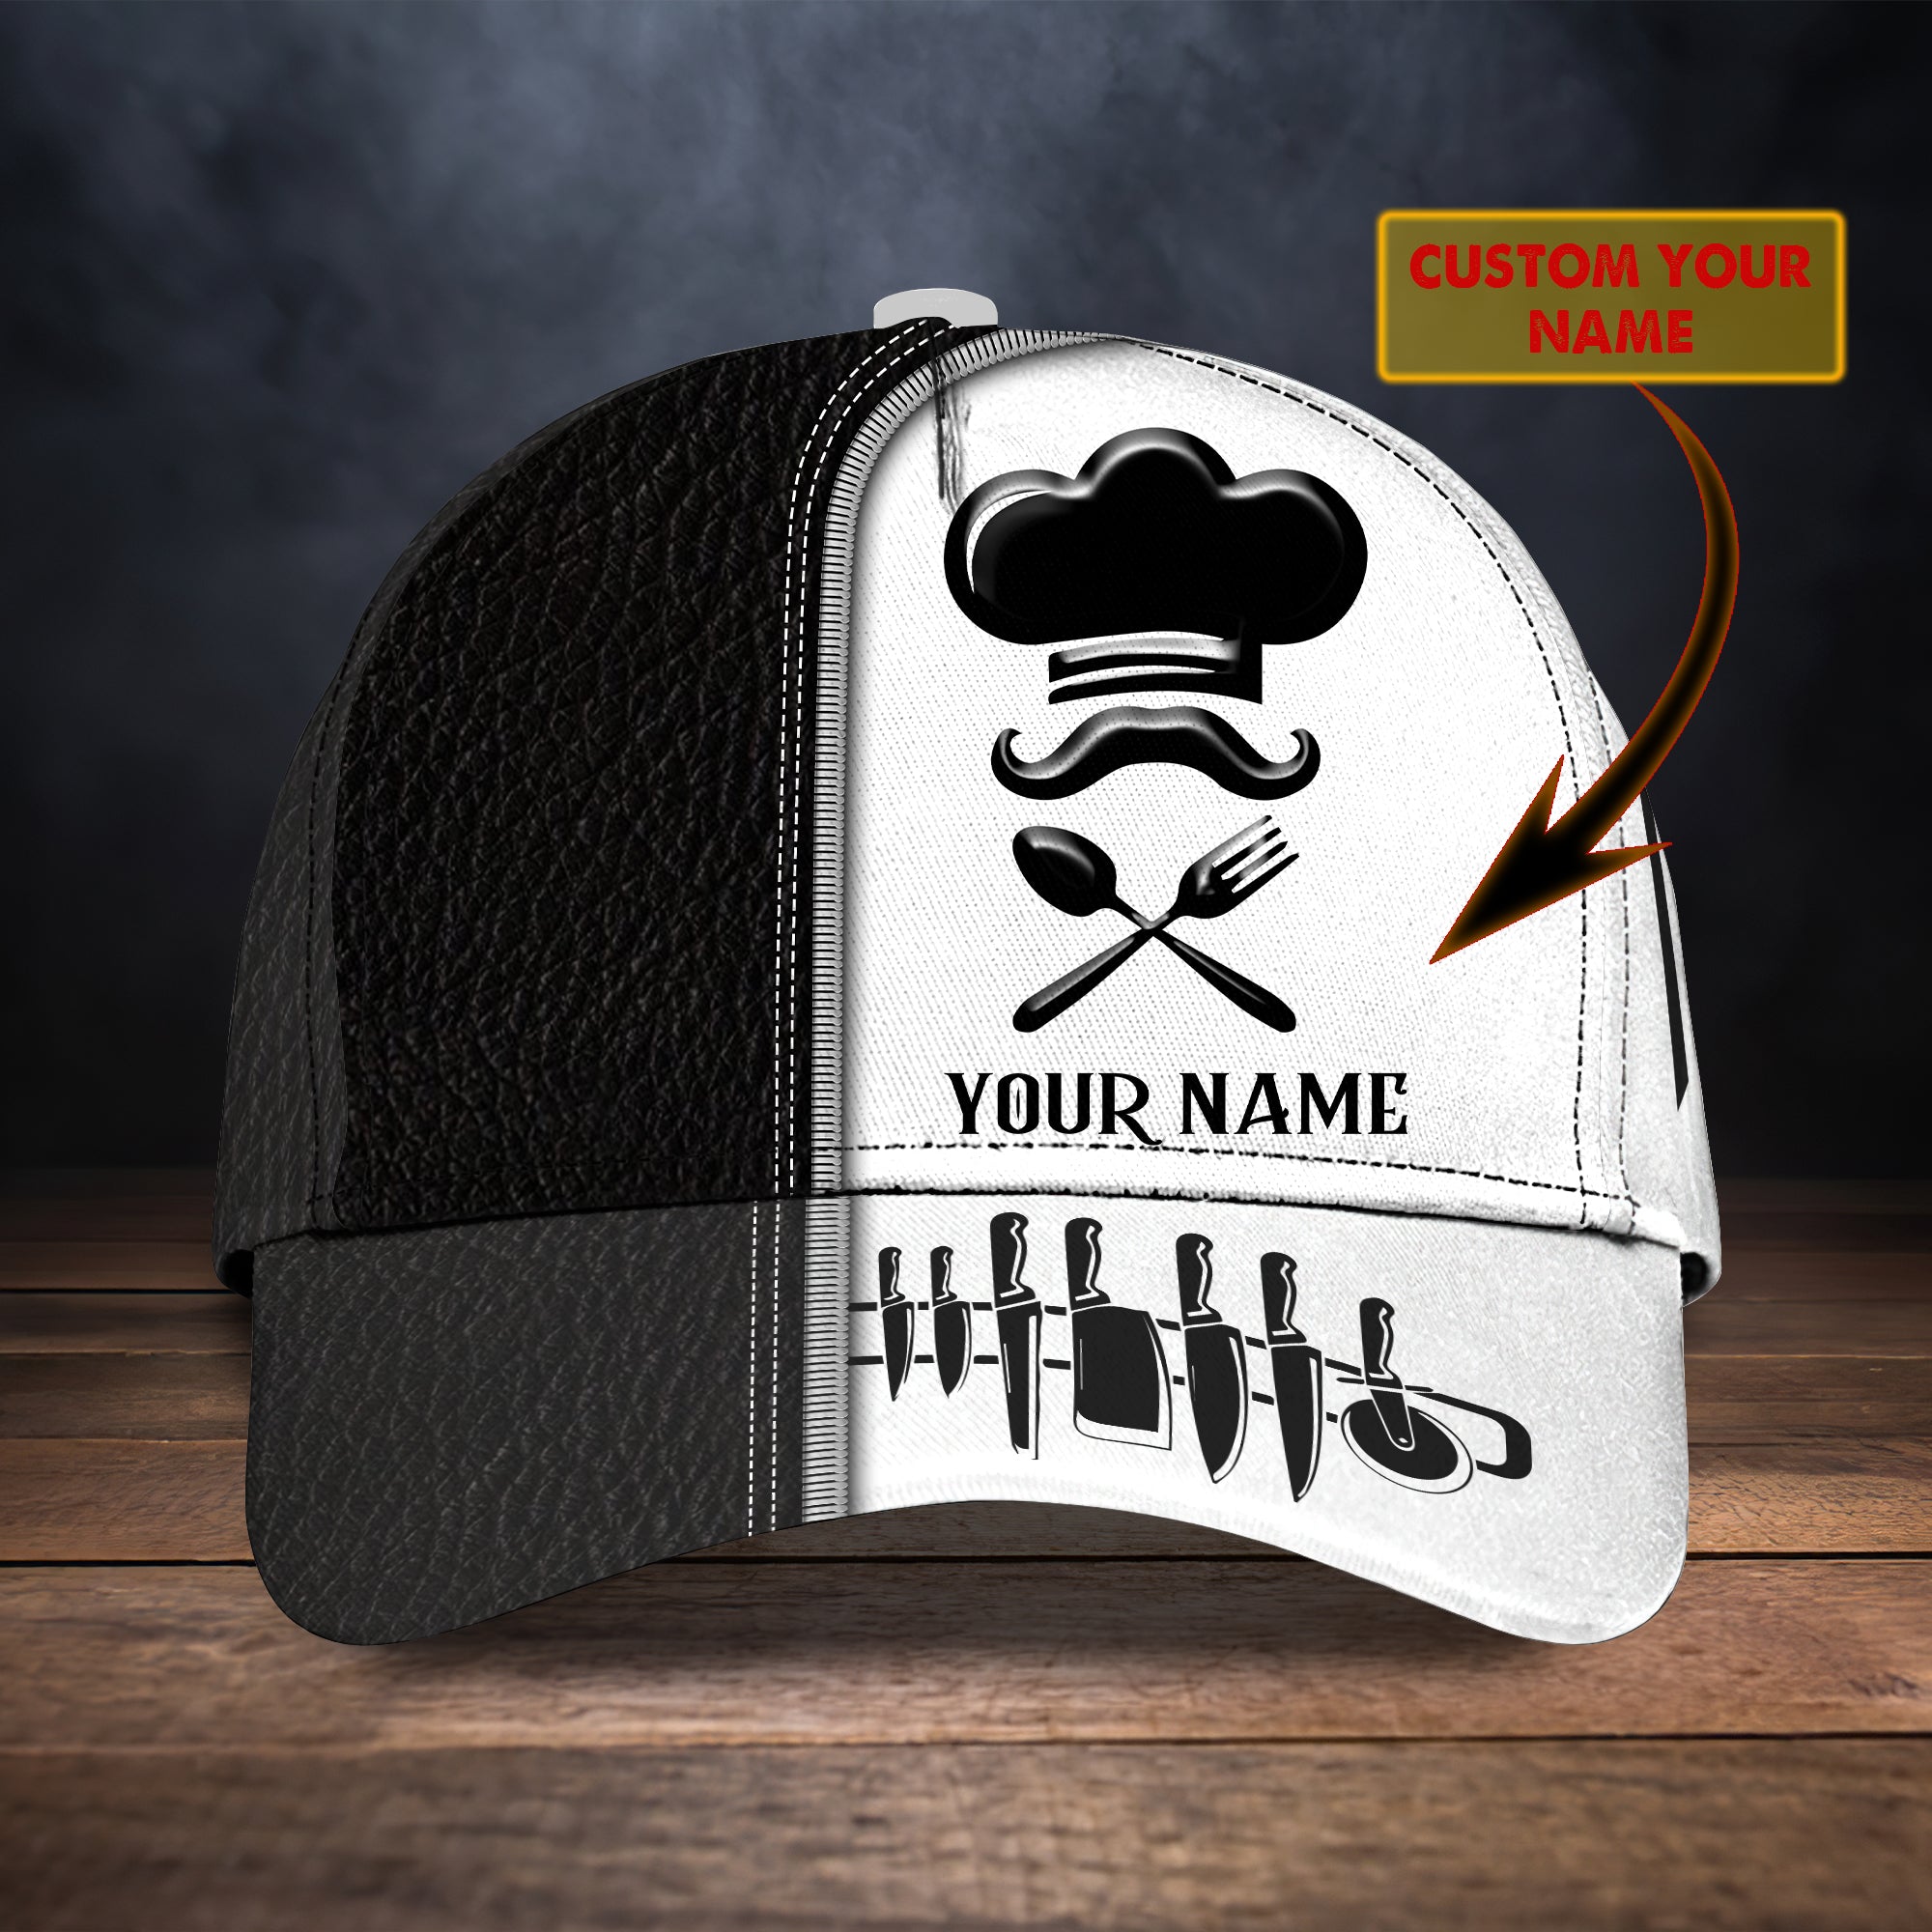 RINC98 - Personalized Name Cap - Chef03